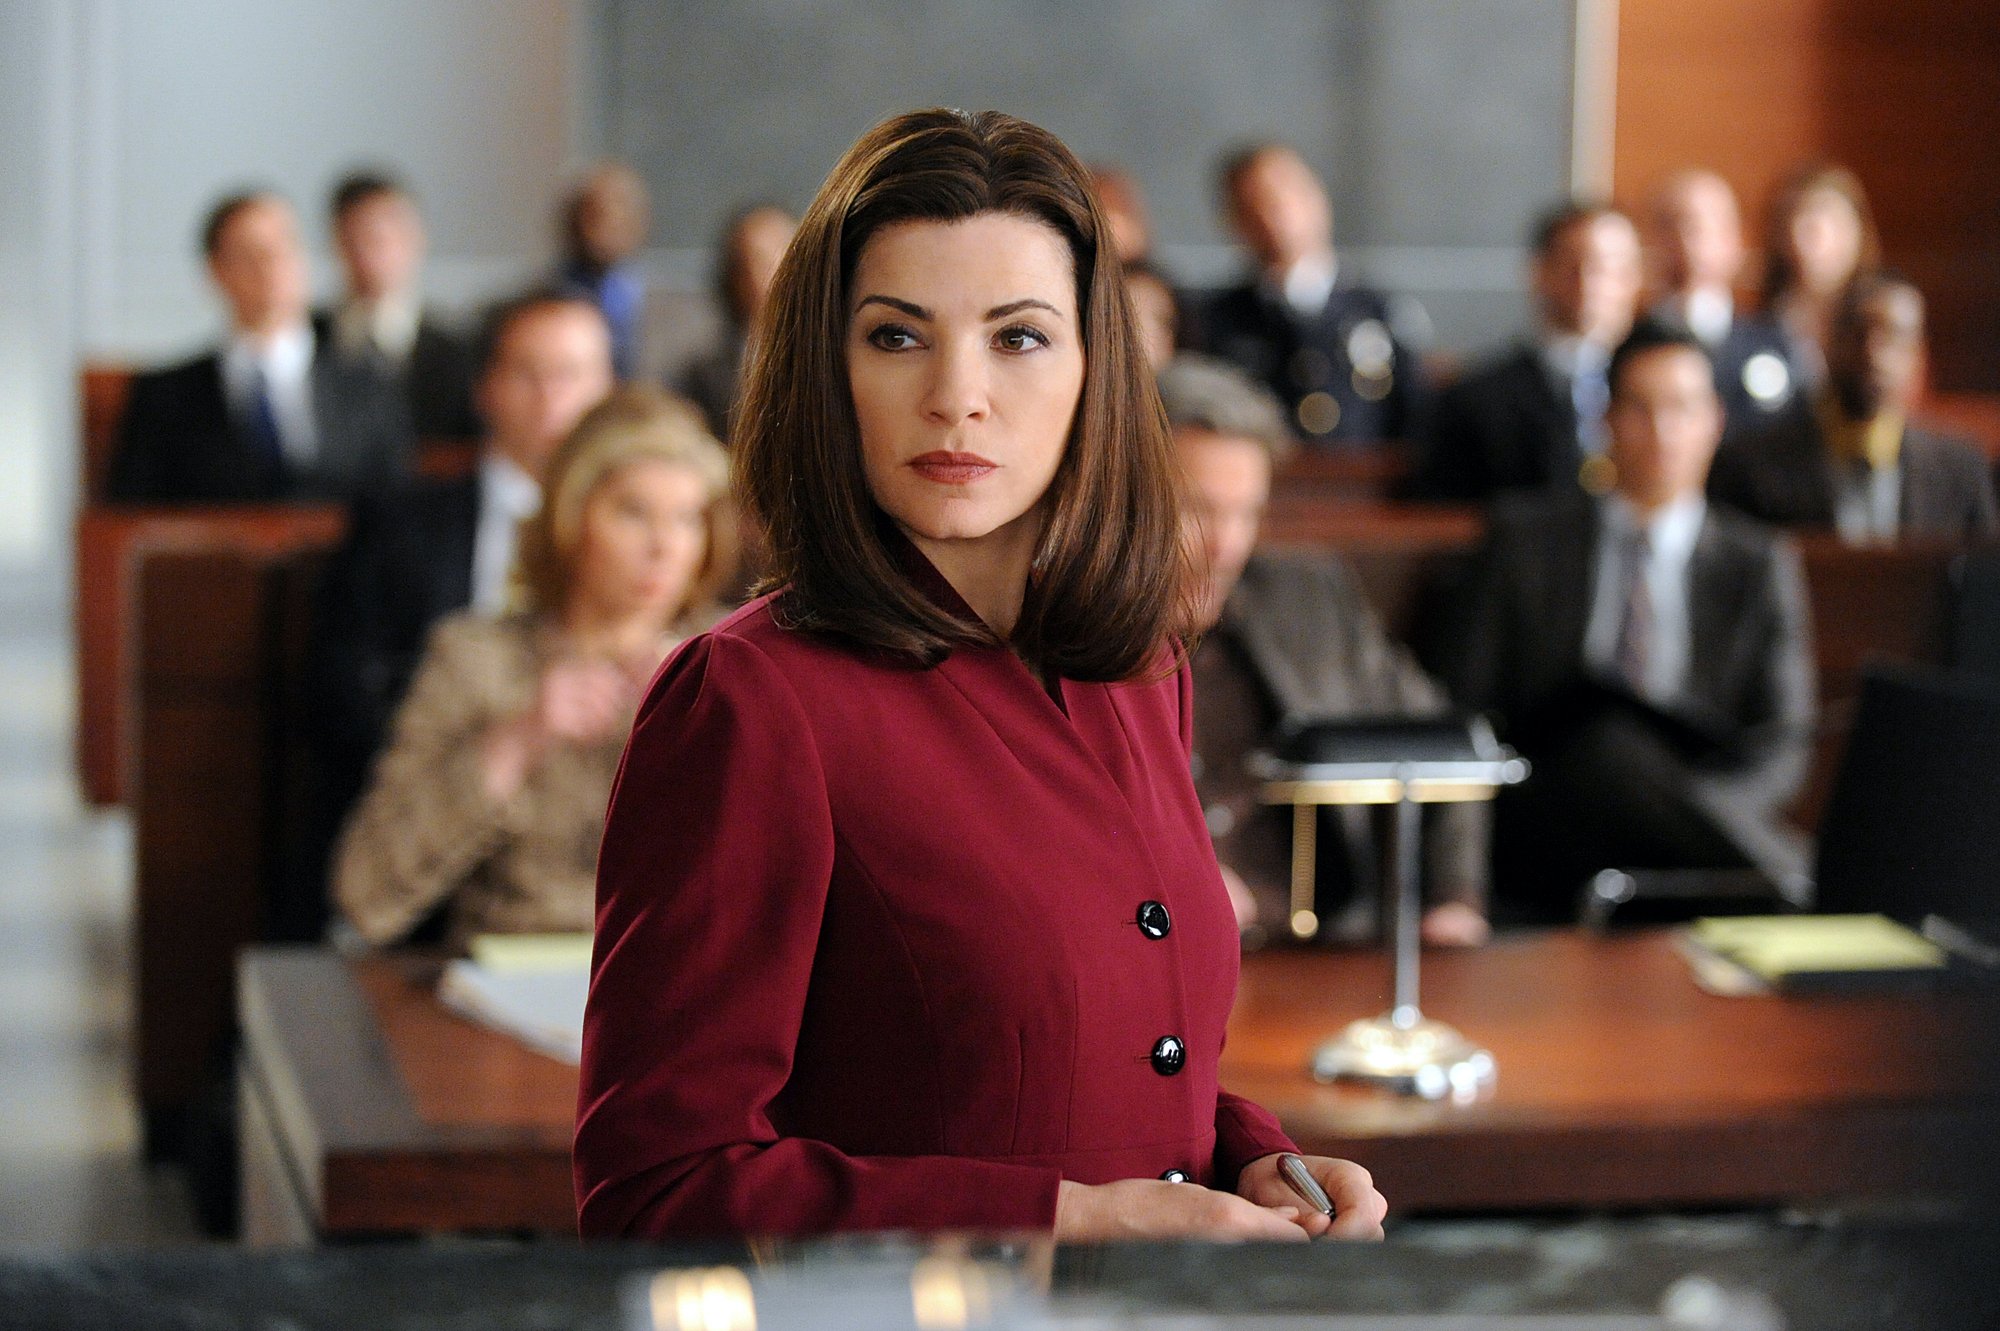 Julianna Margulies on 'The Good Wife'